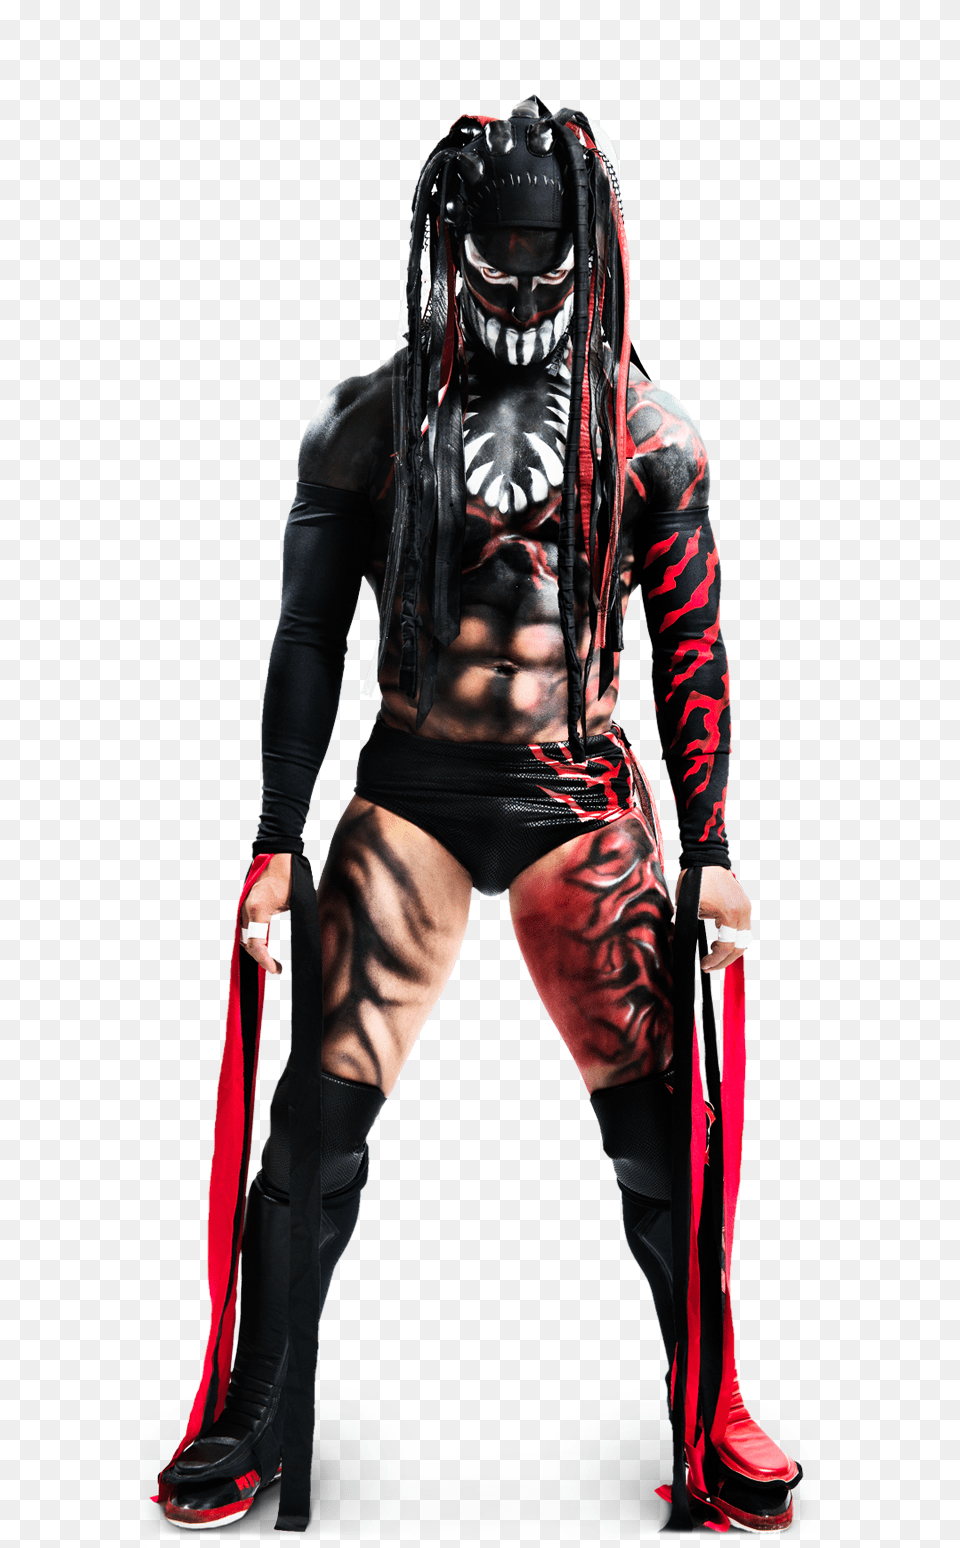 Finn Balor Real Name Fergal Devitt Hometown Bray County Wicklow, Adult, Clothing, Costume, Female Free Transparent Png